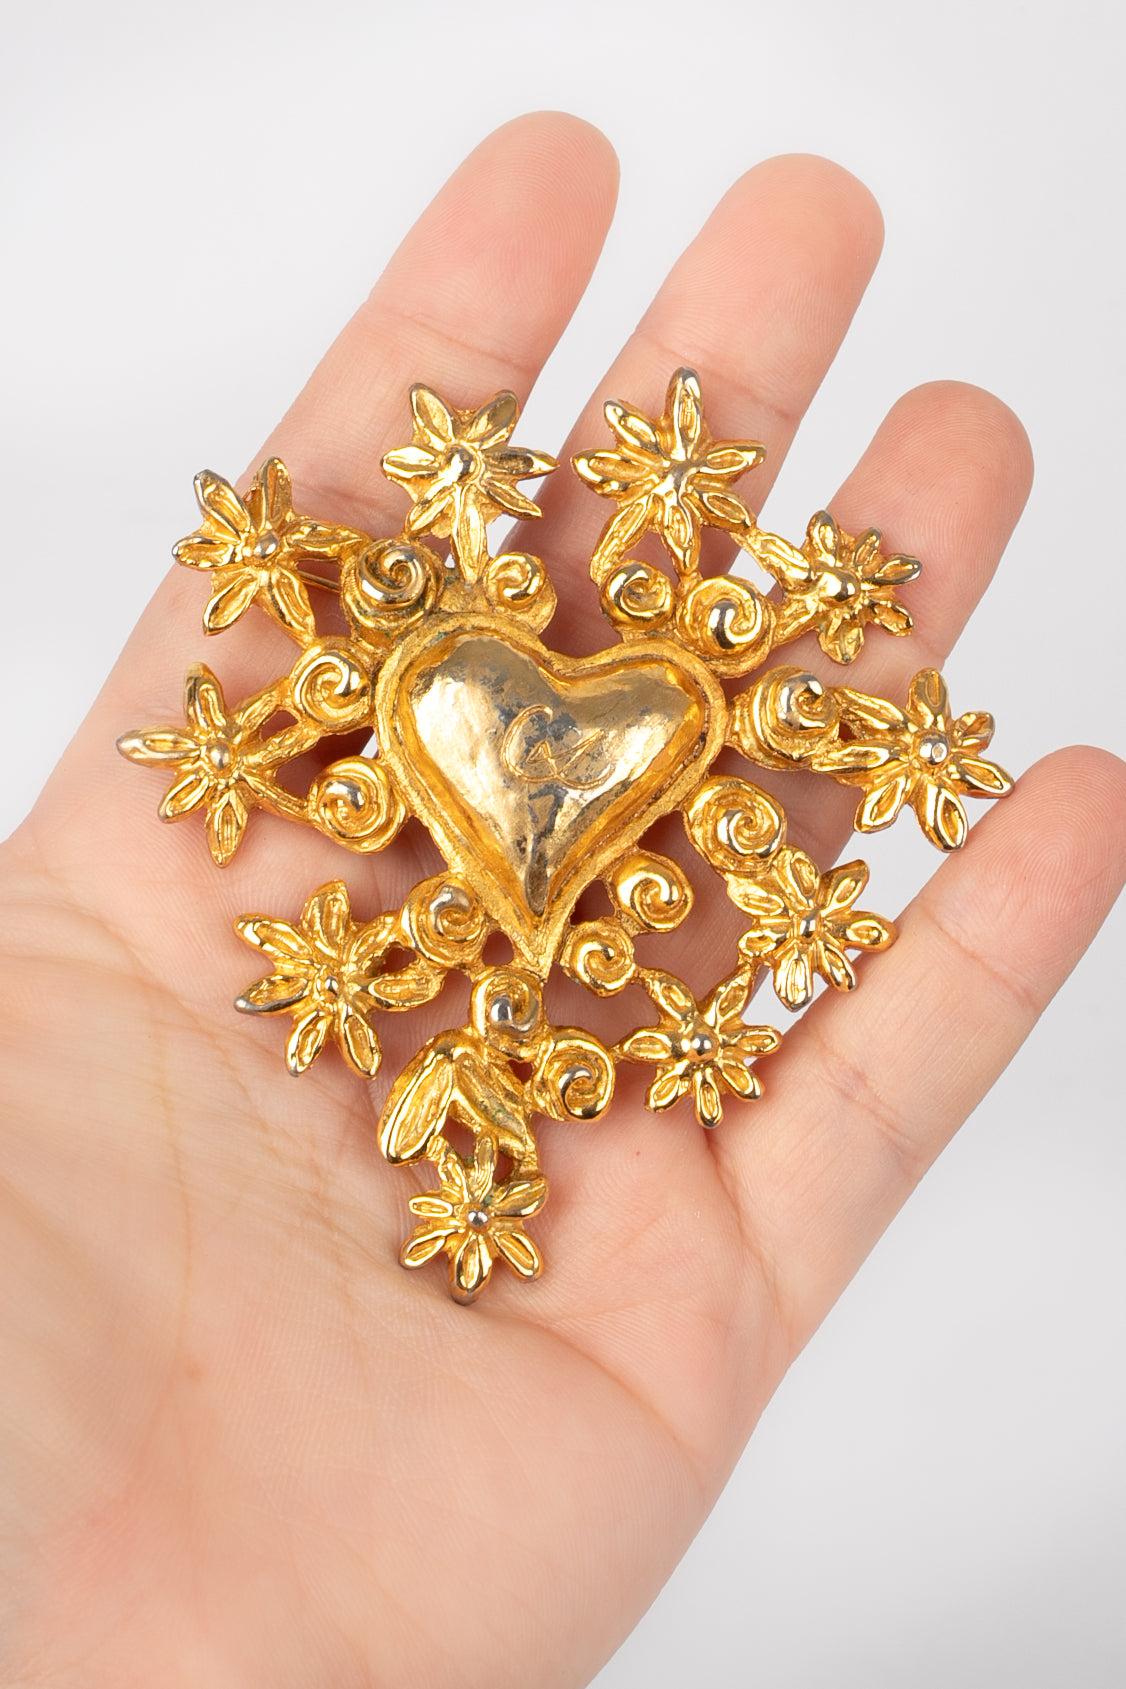 Christian Lacroix Heart Brooch, 1993 For Sale 1